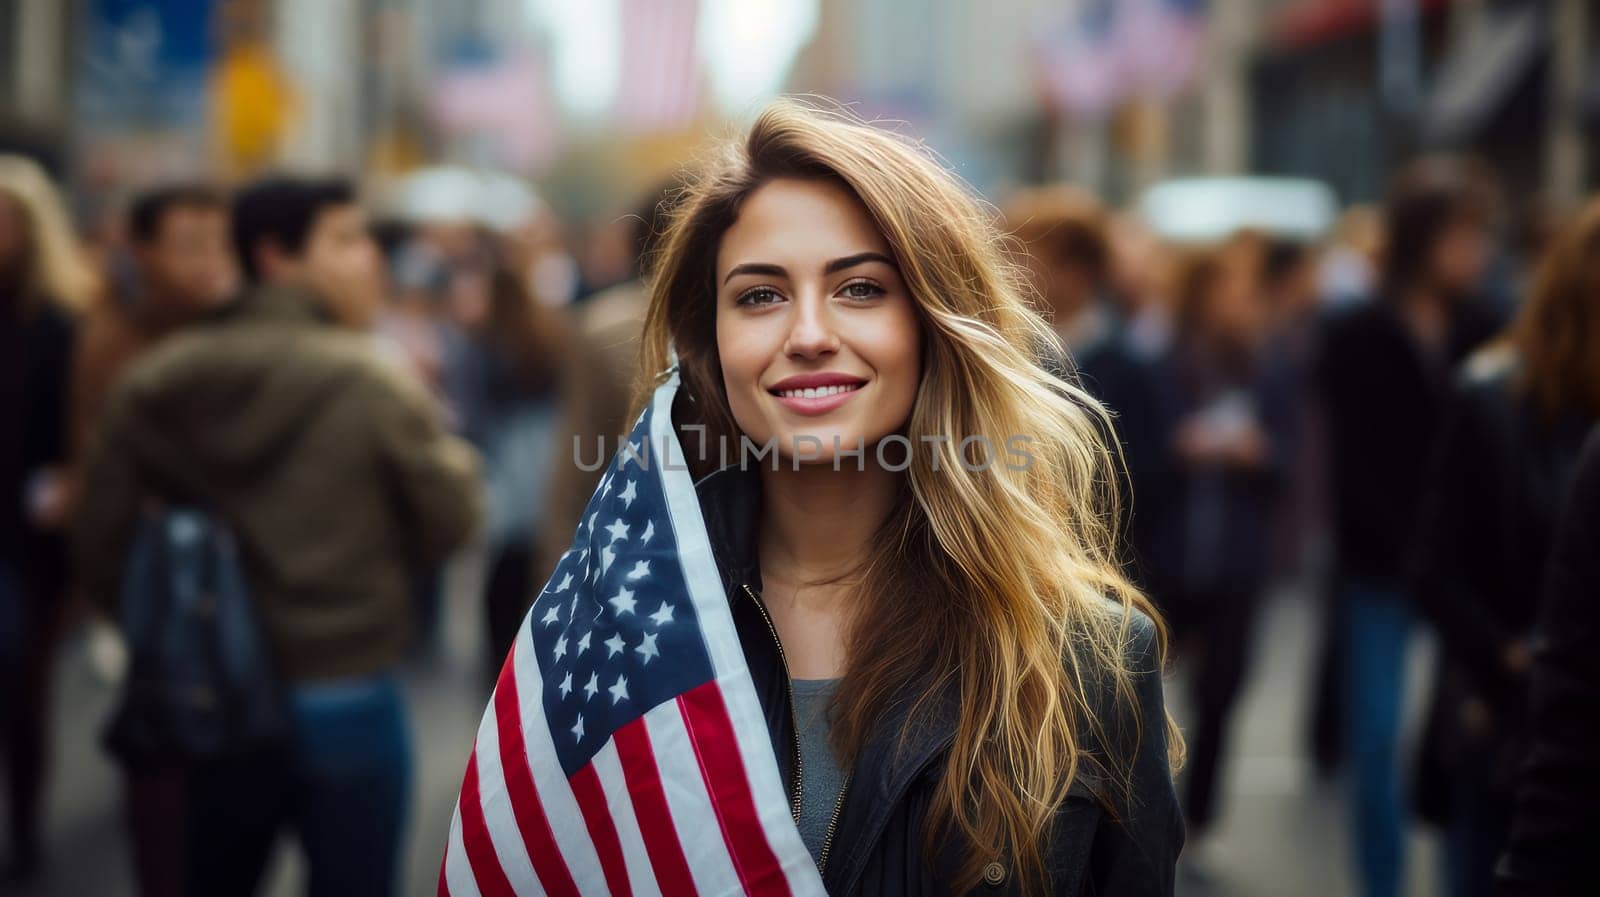 Happy, smiling woman with an American flag in city on Independence Day holidays of the United States of America. American President's Day, USA Independence Day, American flag colors background, 4 July, February holiday, stars and stripes red and blue